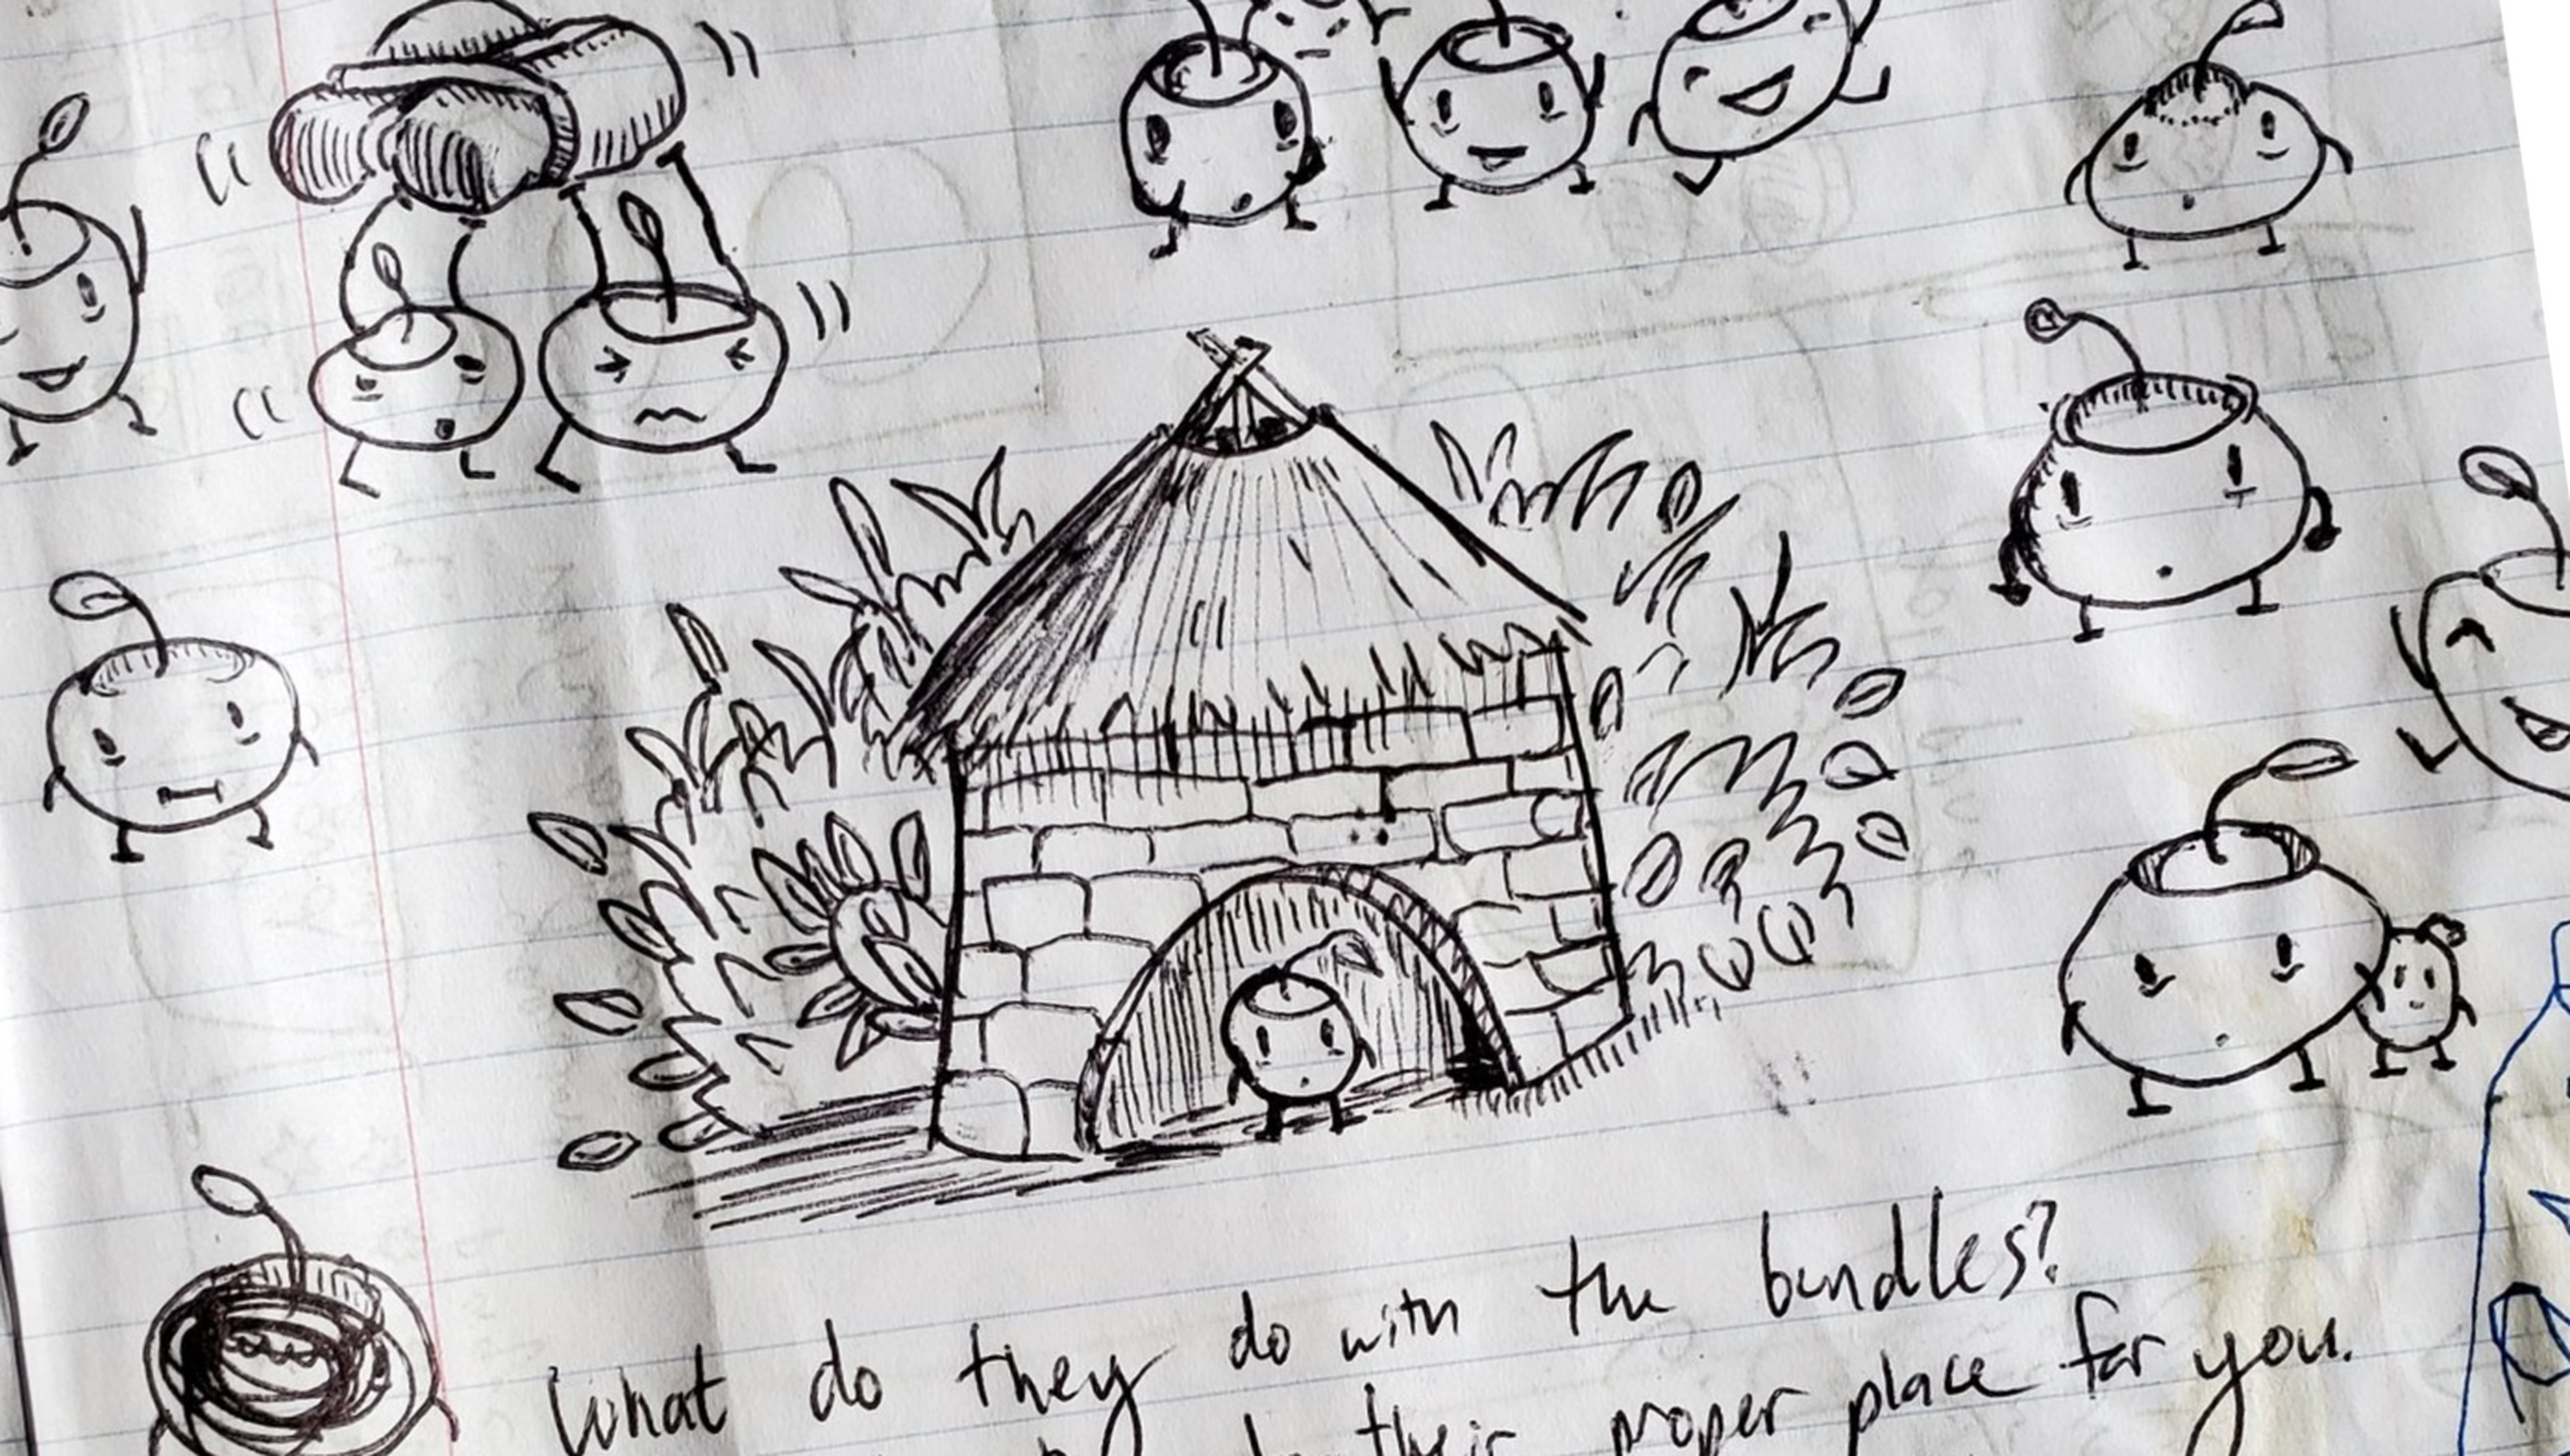  Stardew Valley creator shares early concept doodles on Twitter, and now fans want a full art book 